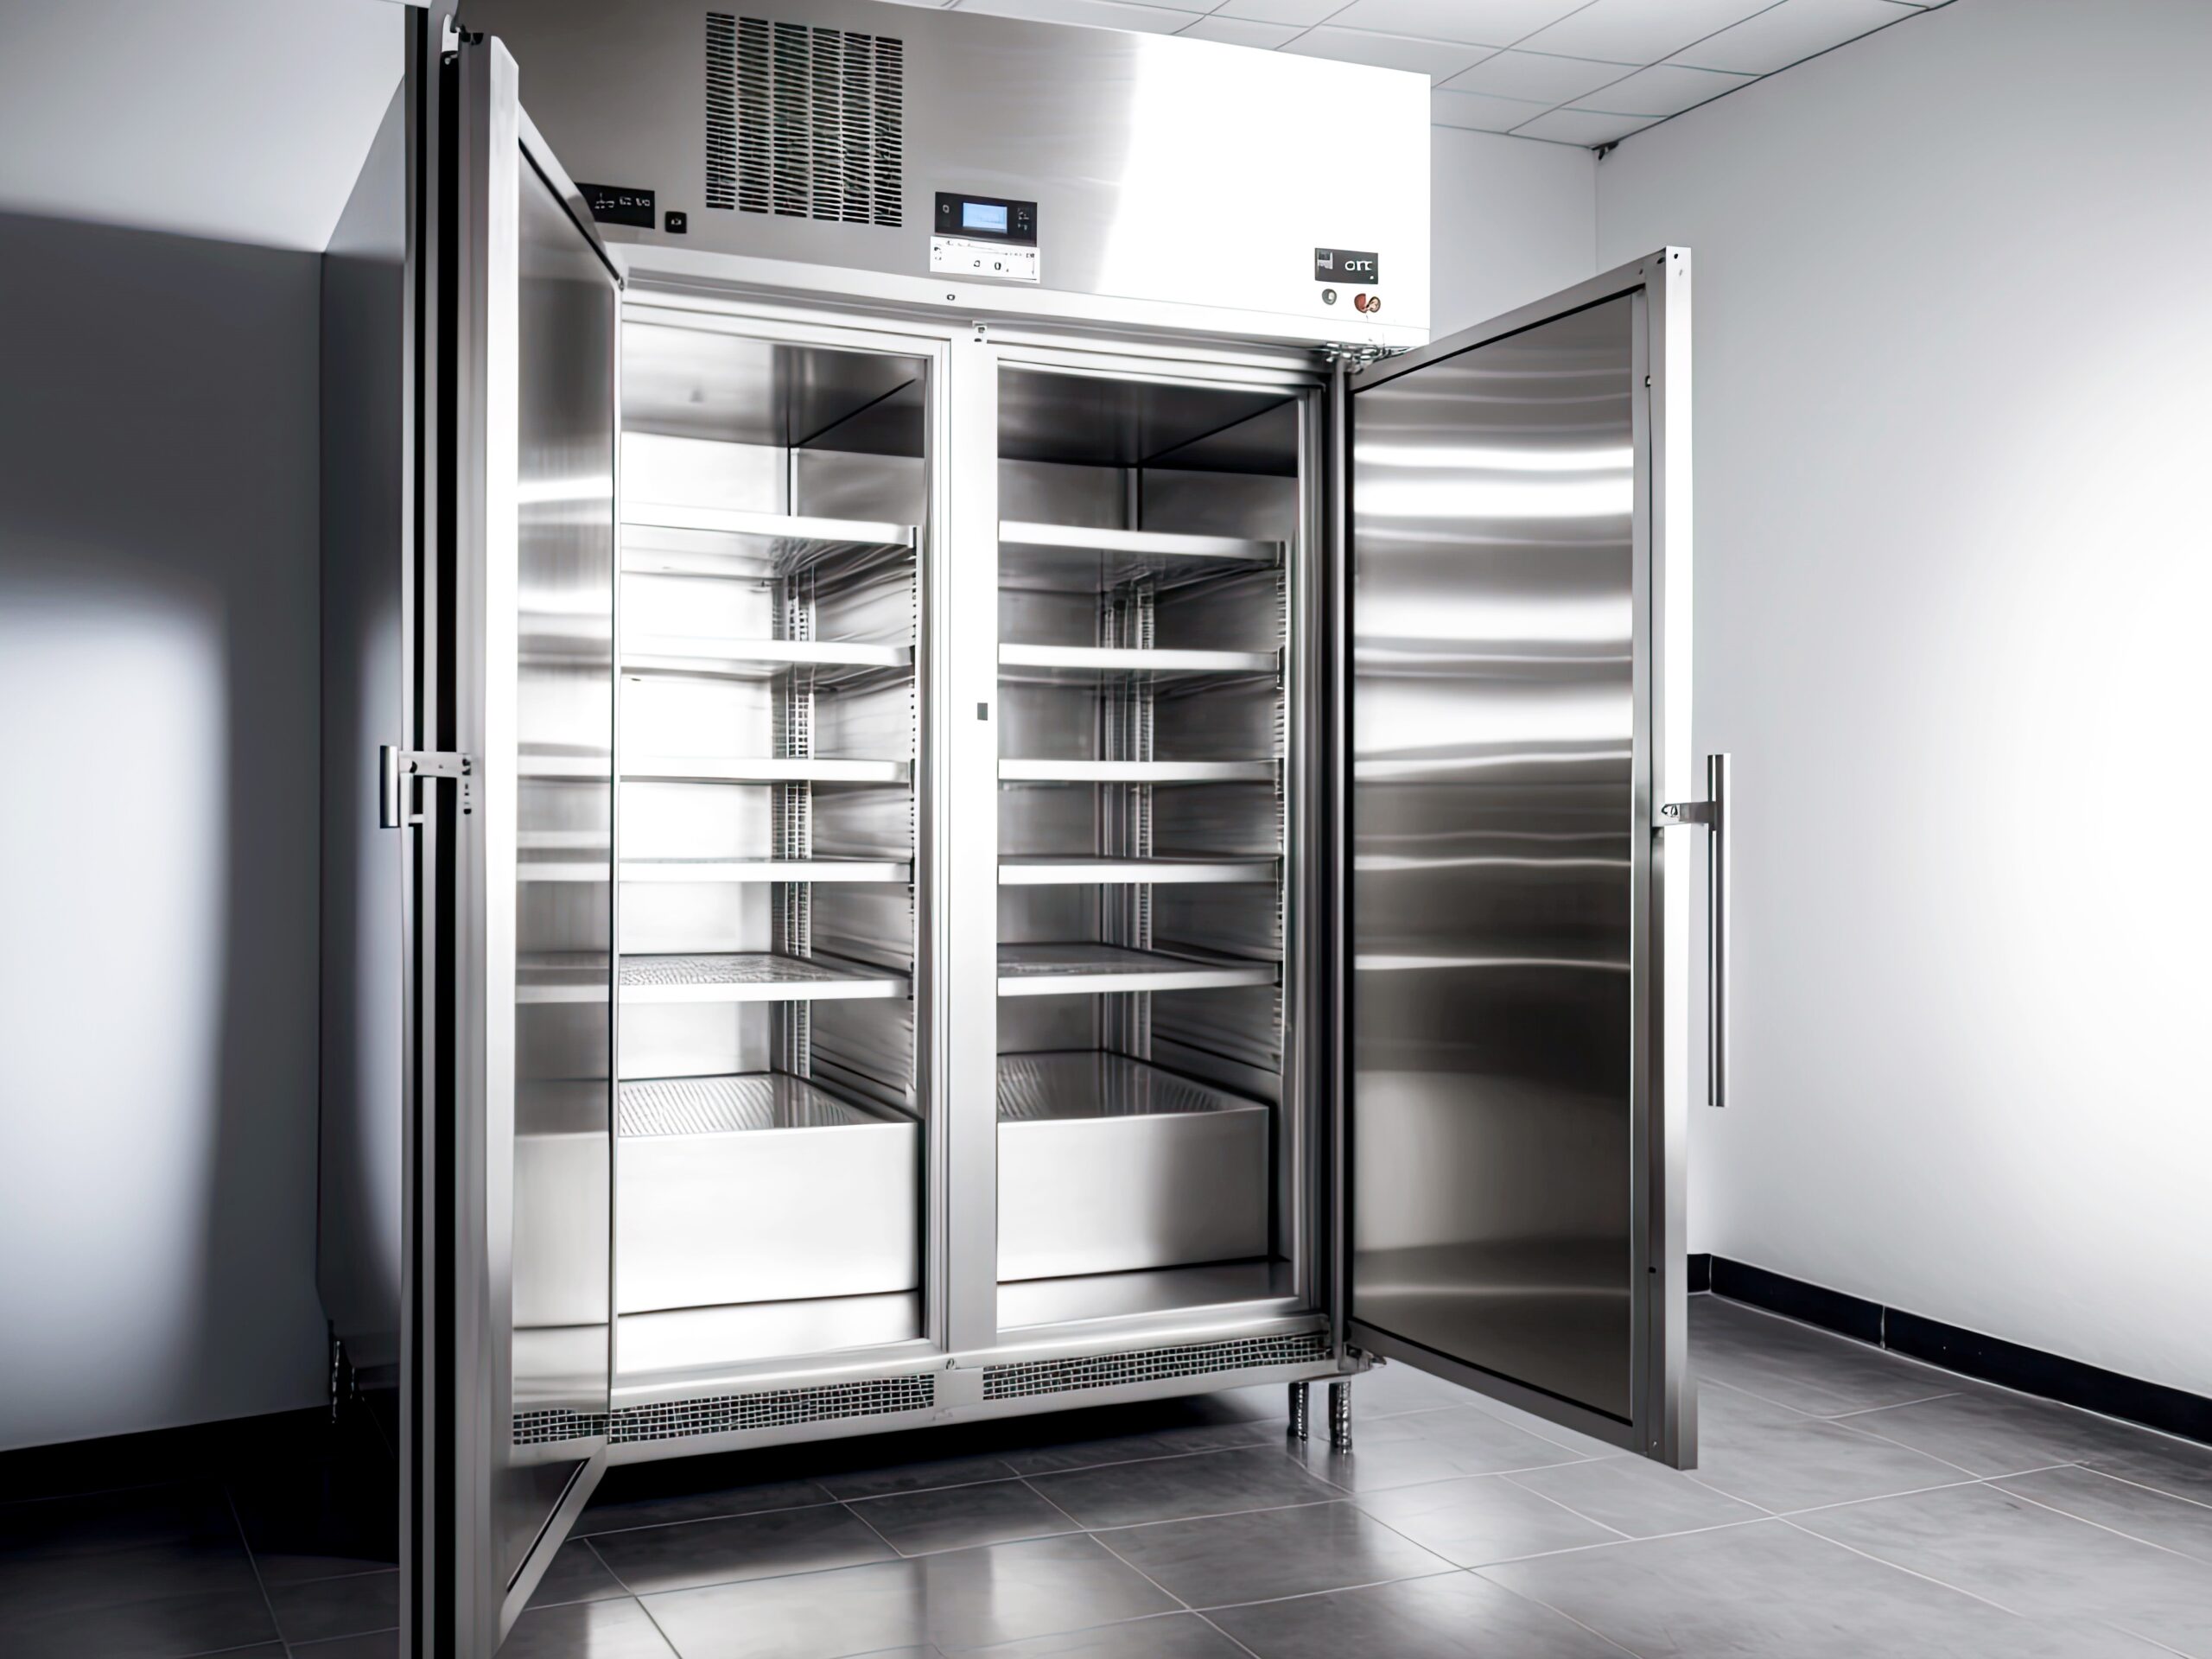 Large two-door refrigerator chamber for storing large quantities of products